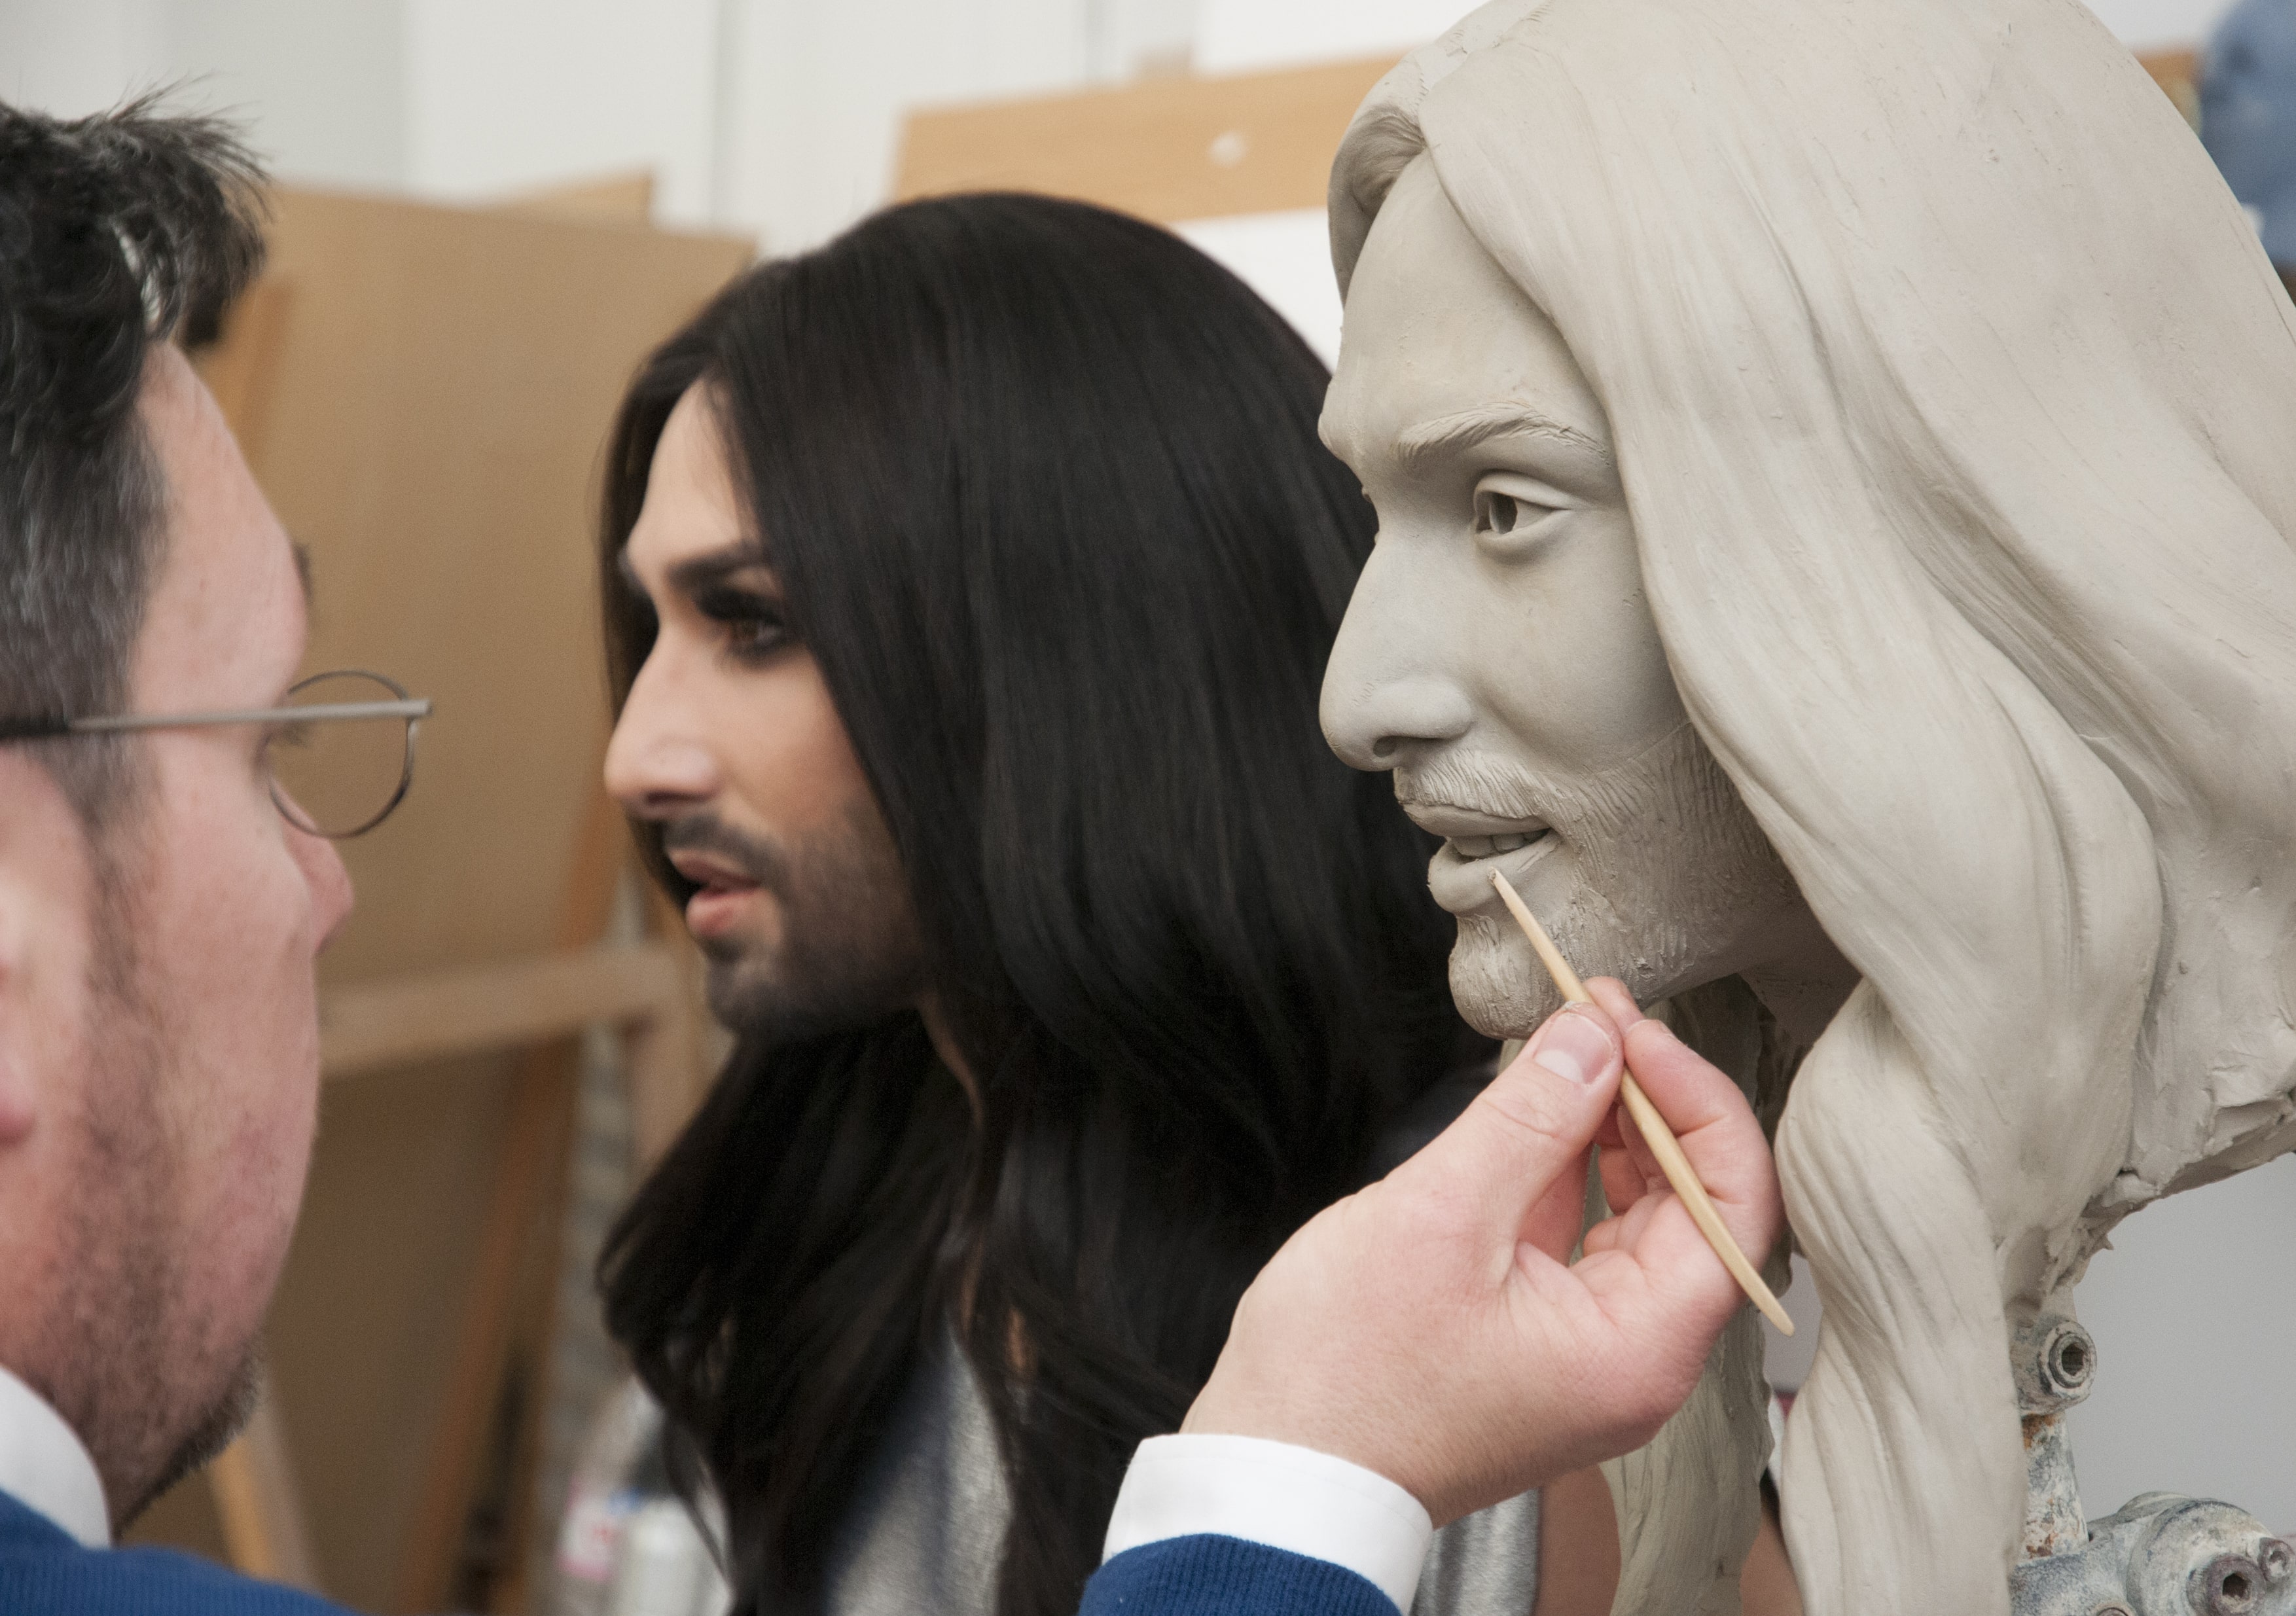 The was figure of Conchita Wurst in the making.